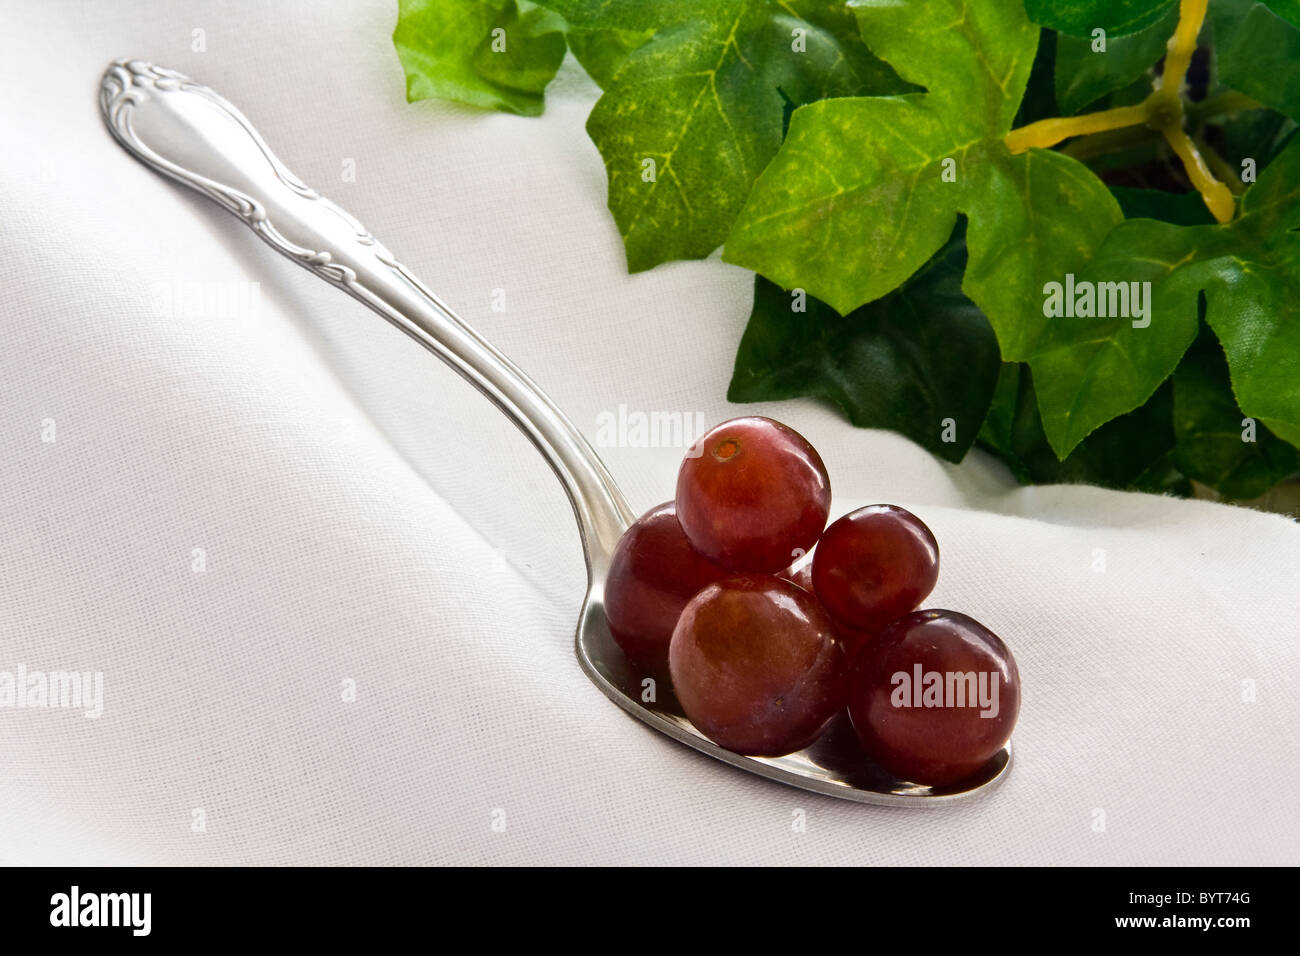 Red grapes piled on spoon on white cloth with leaves on background Stock Photo